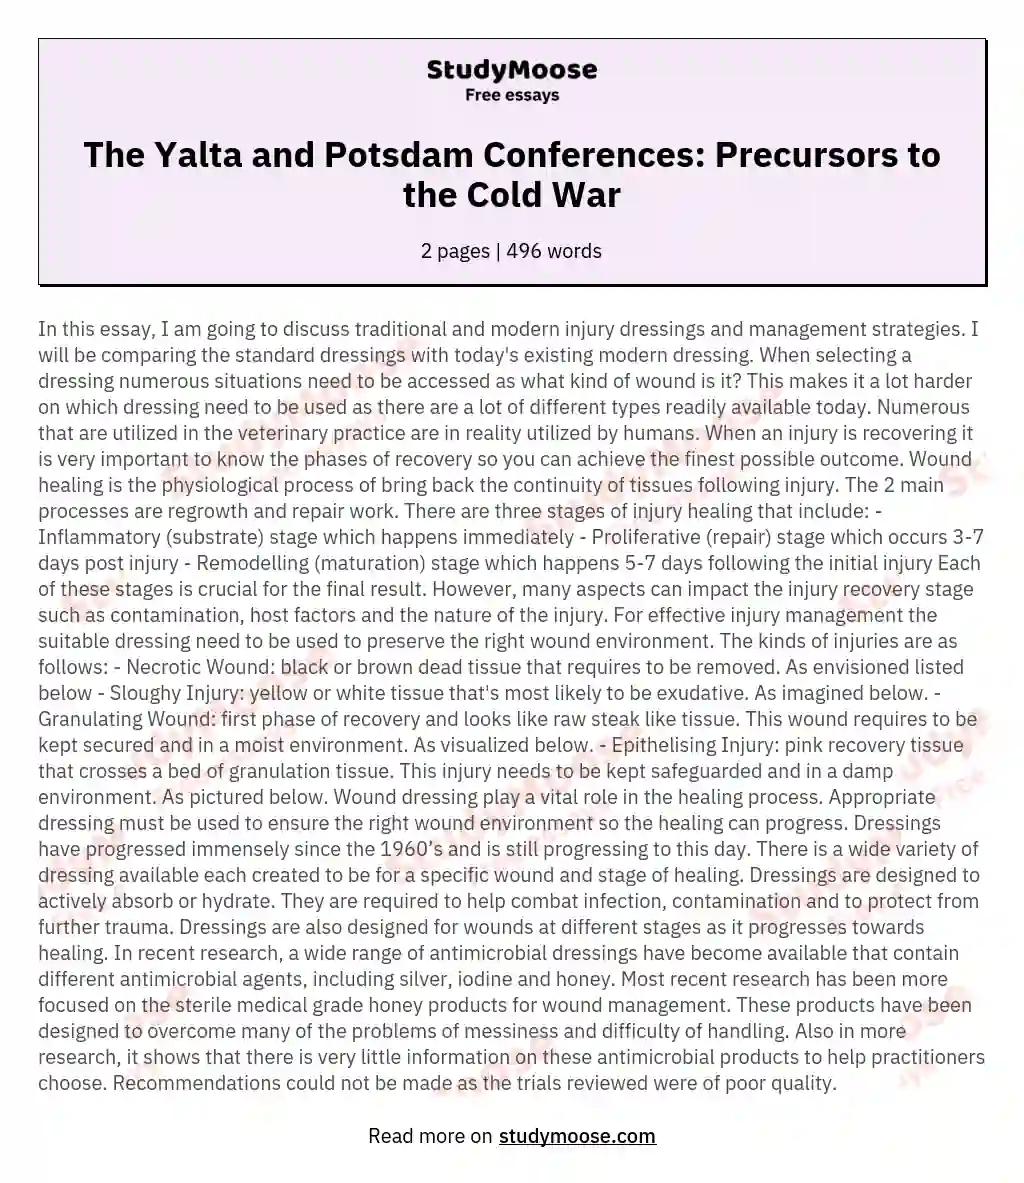 The Yalta and Potsdam Conferences: Precursors to the Cold War essay